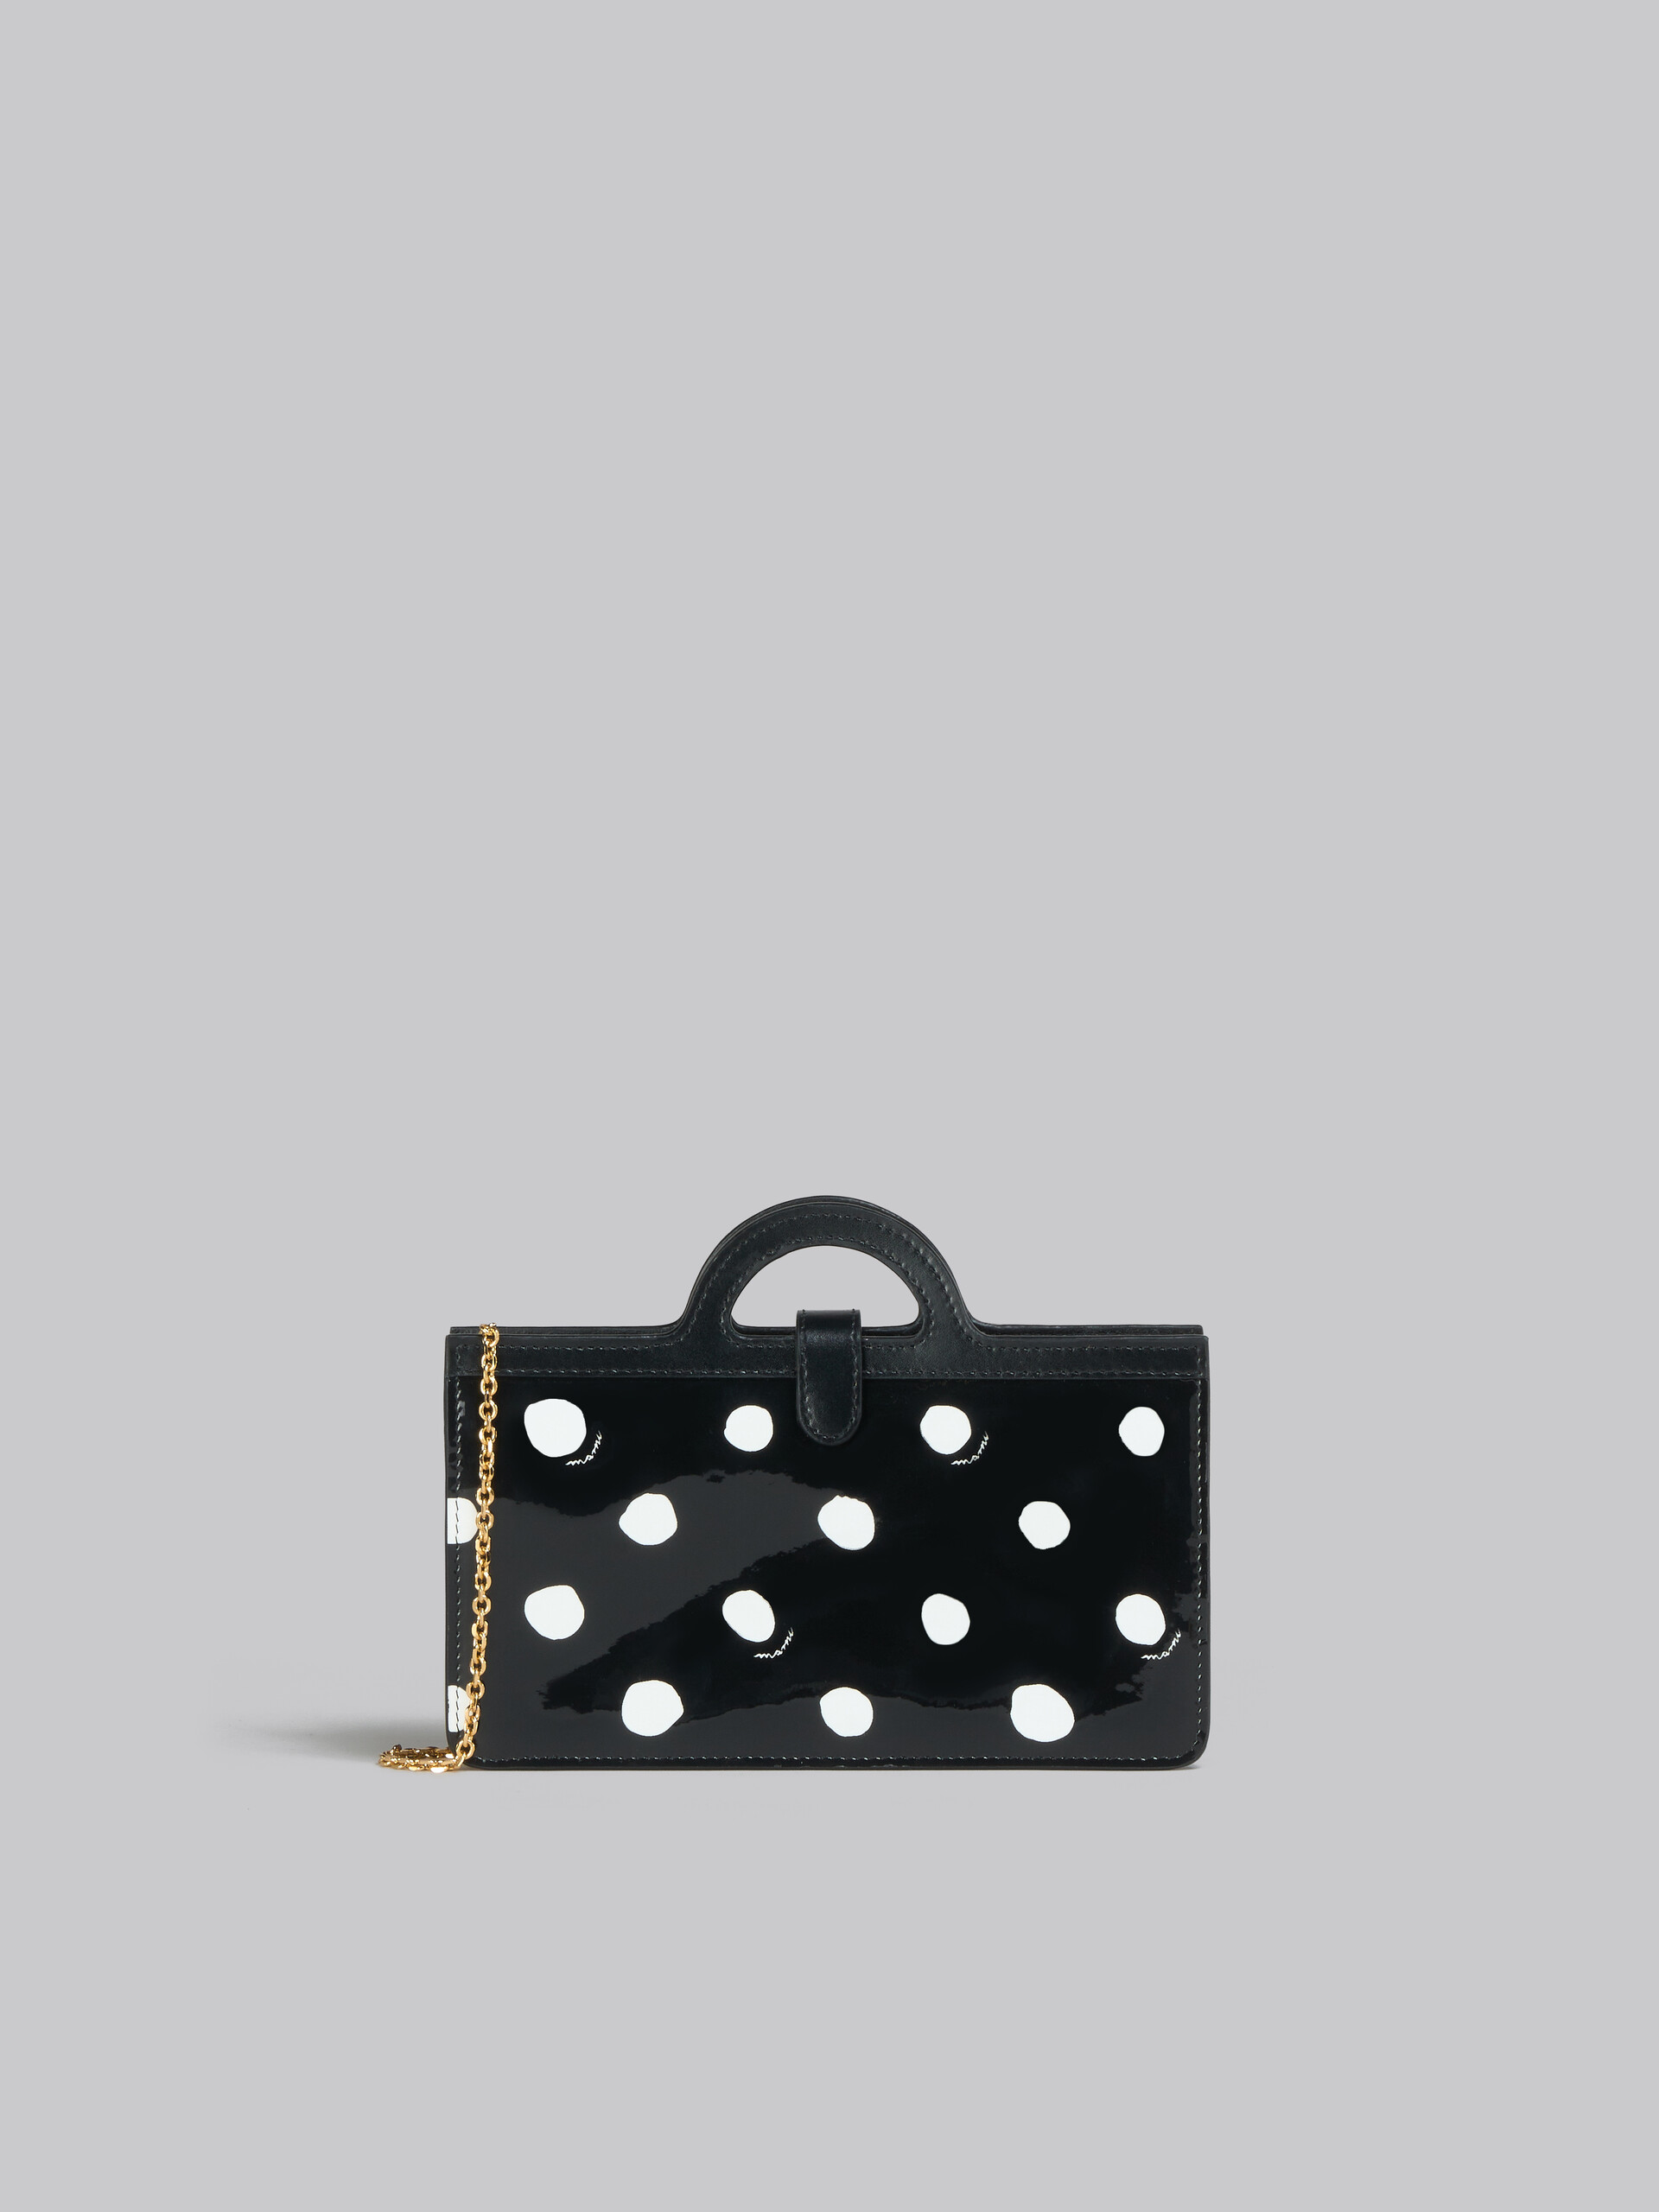 Black and white polka-dot patent leather Tropicalia long wallet with chain - Wallets - Image 3